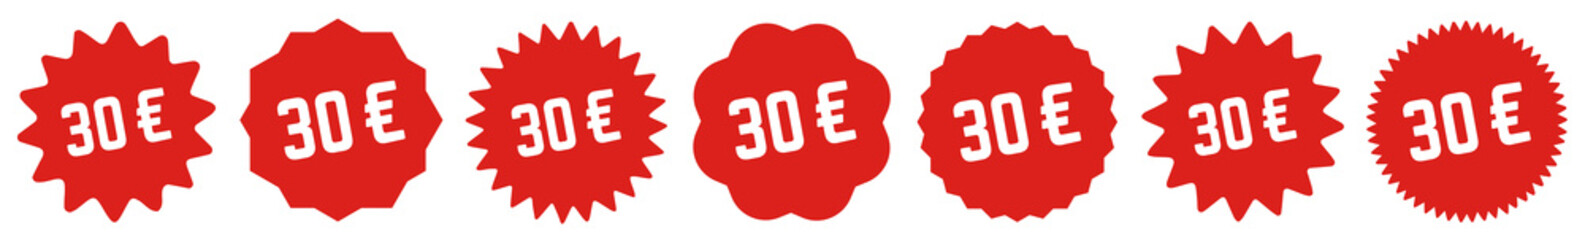 Wall Mural - 30 Price Tag Red | 30 Euro | Special Offer Icon | Sale Sticker | Deal Label | Variations